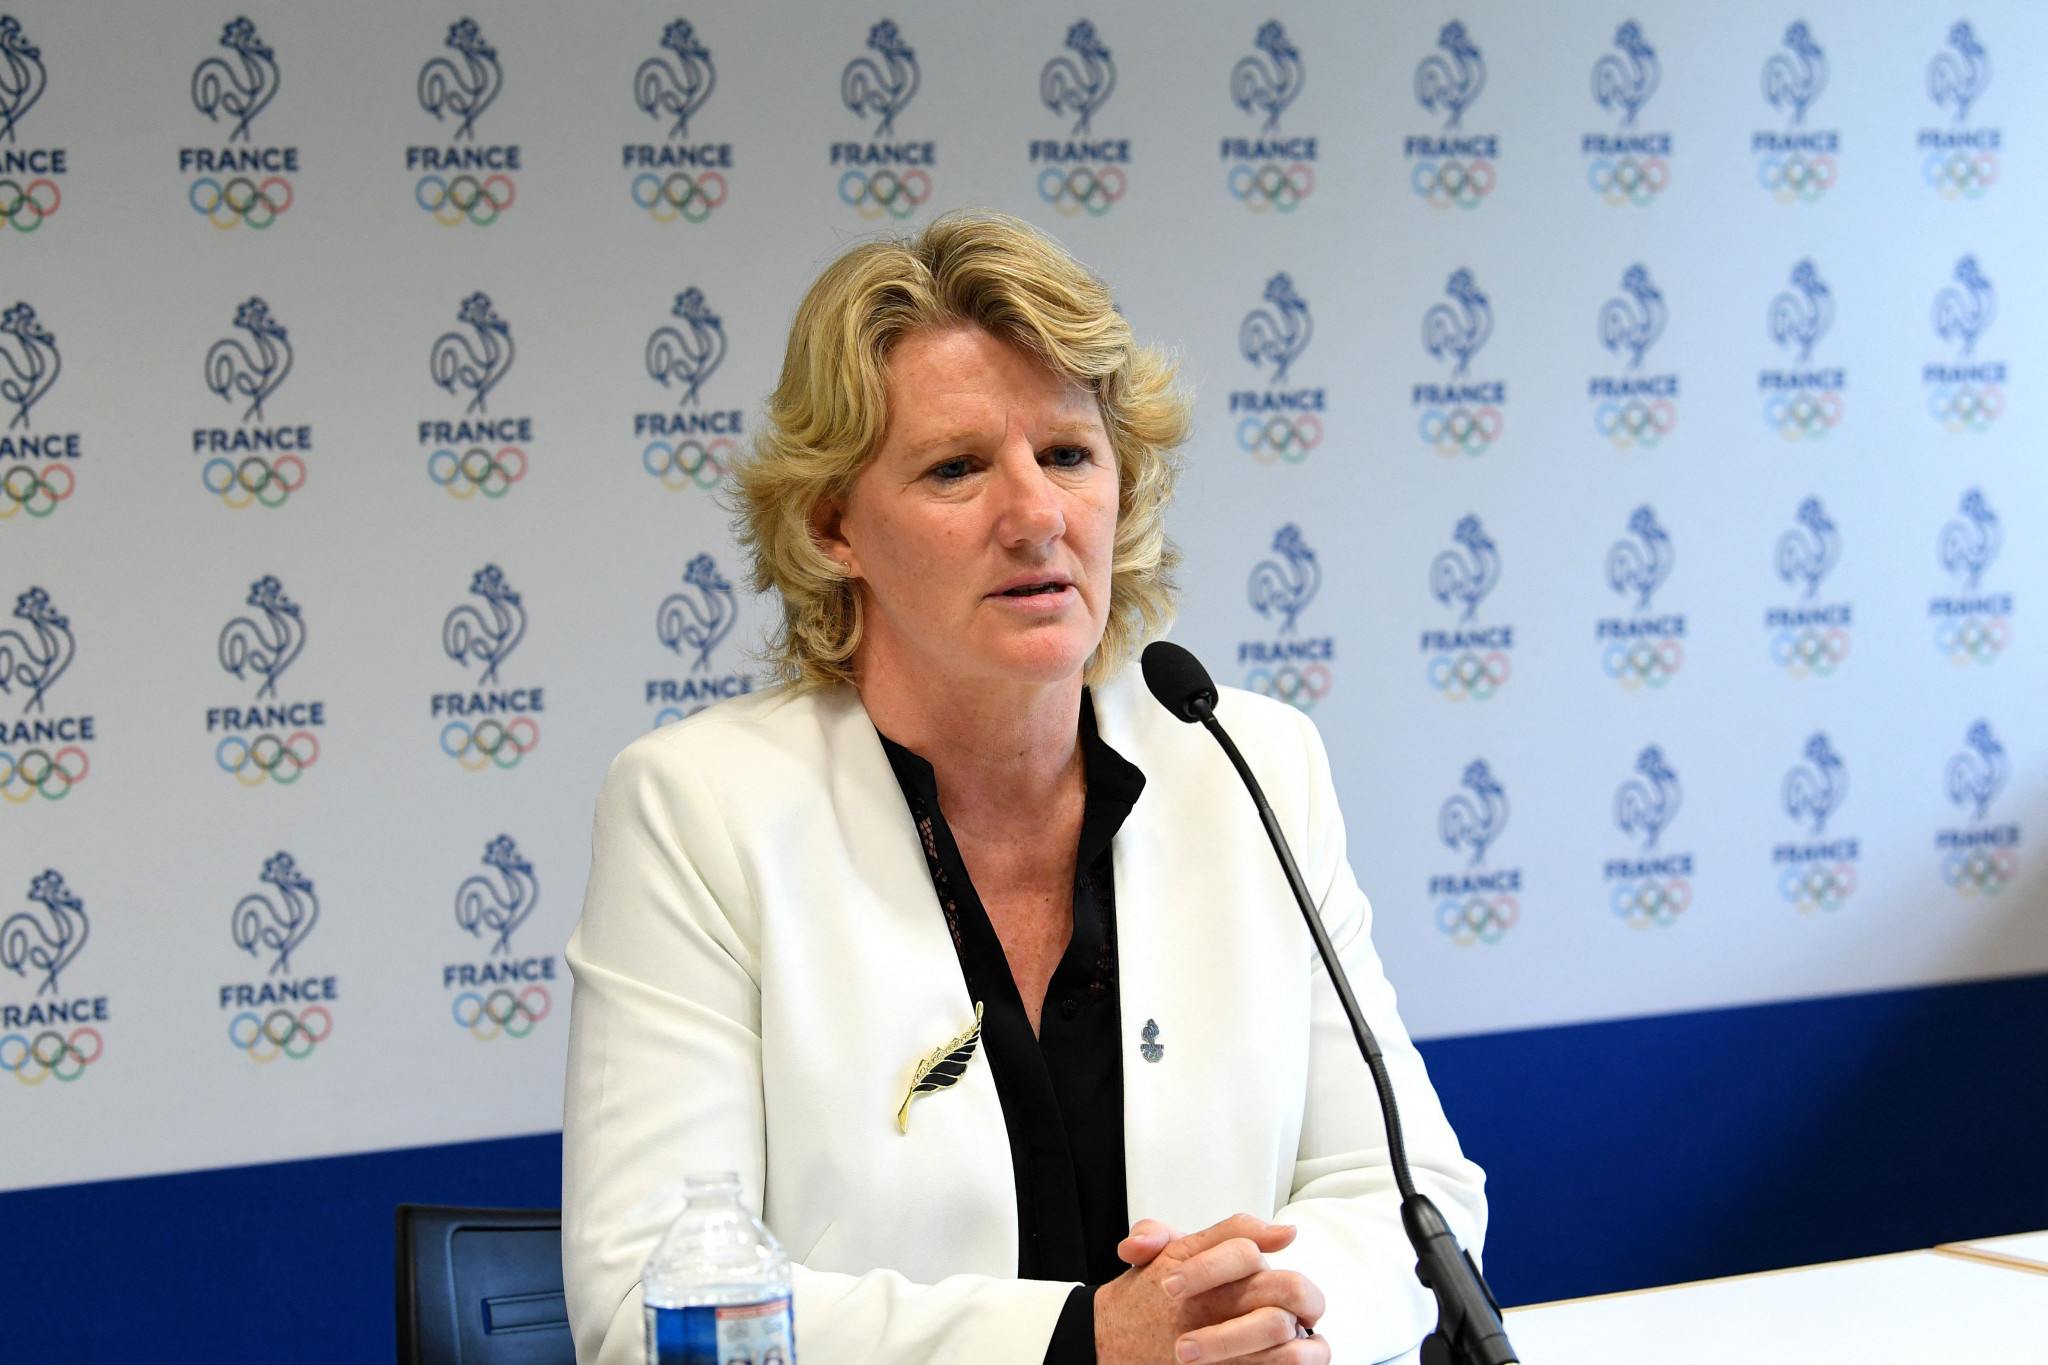 Brigitte Henriques is the first woman to lead the CNOSF ©Getty Images